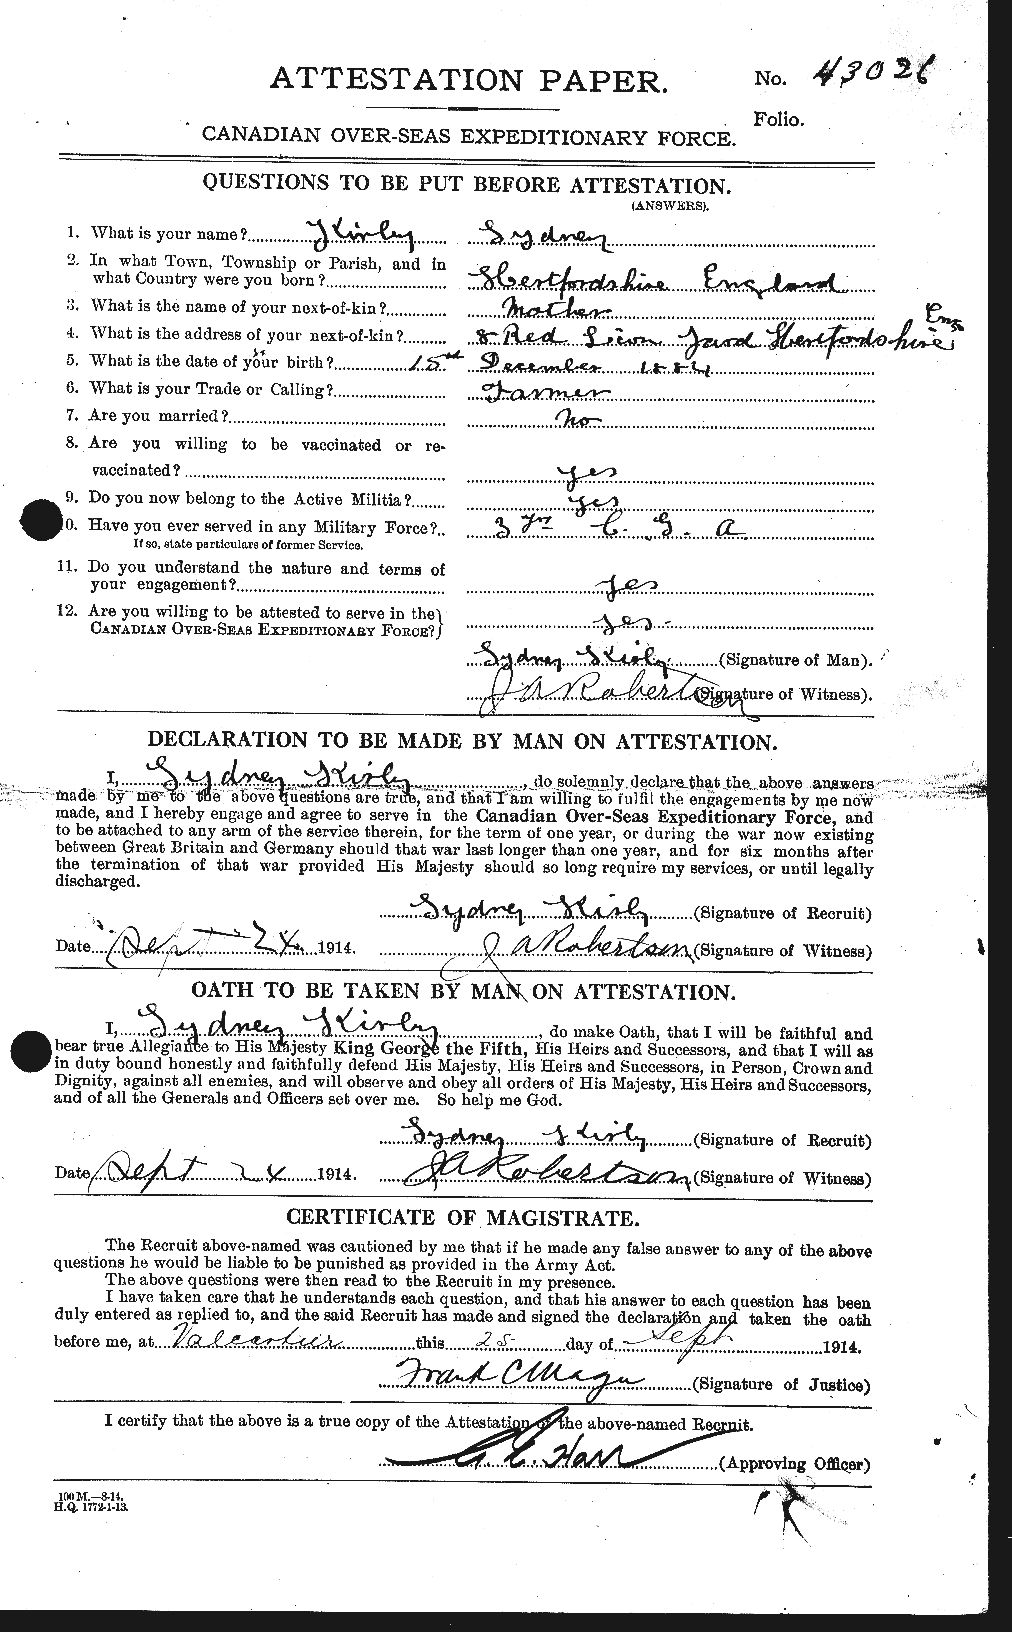 Personnel Records of the First World War - CEF 437277a